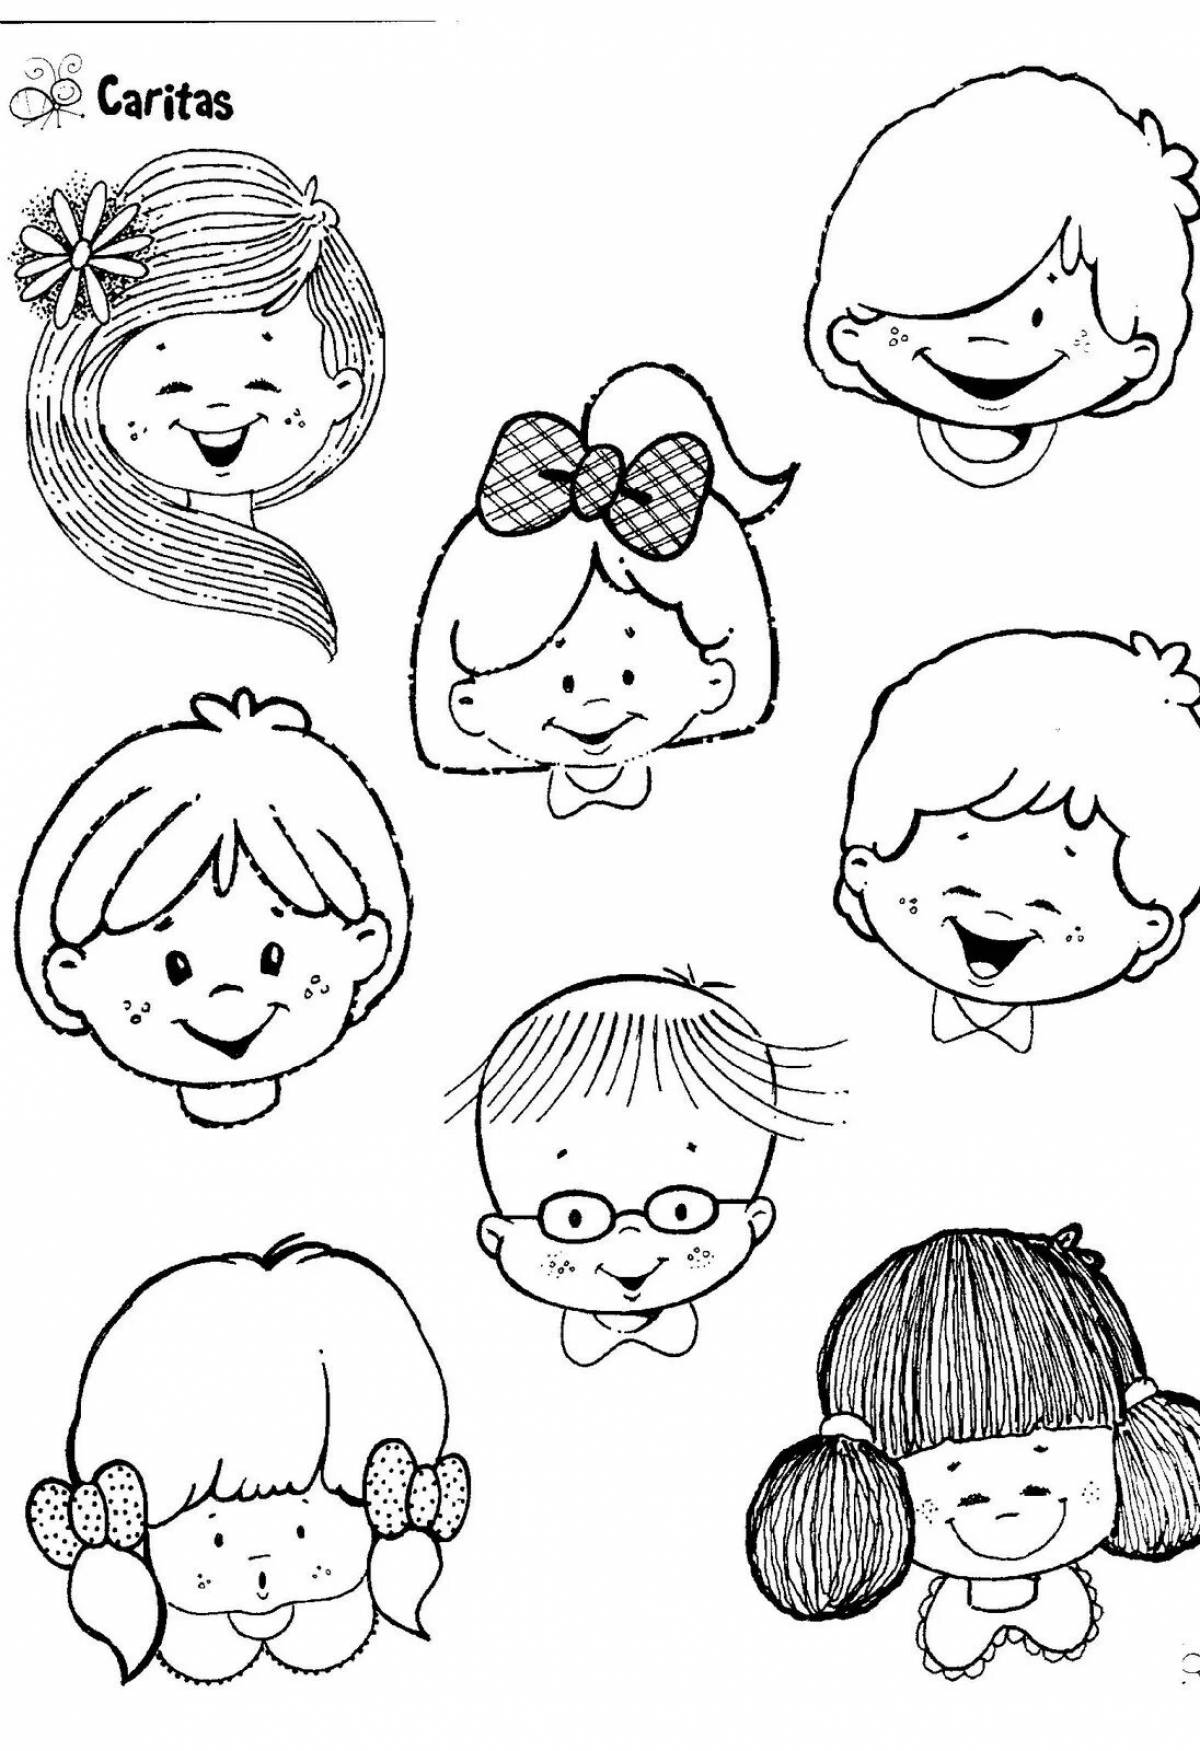 Adorable children's coloring book for kids